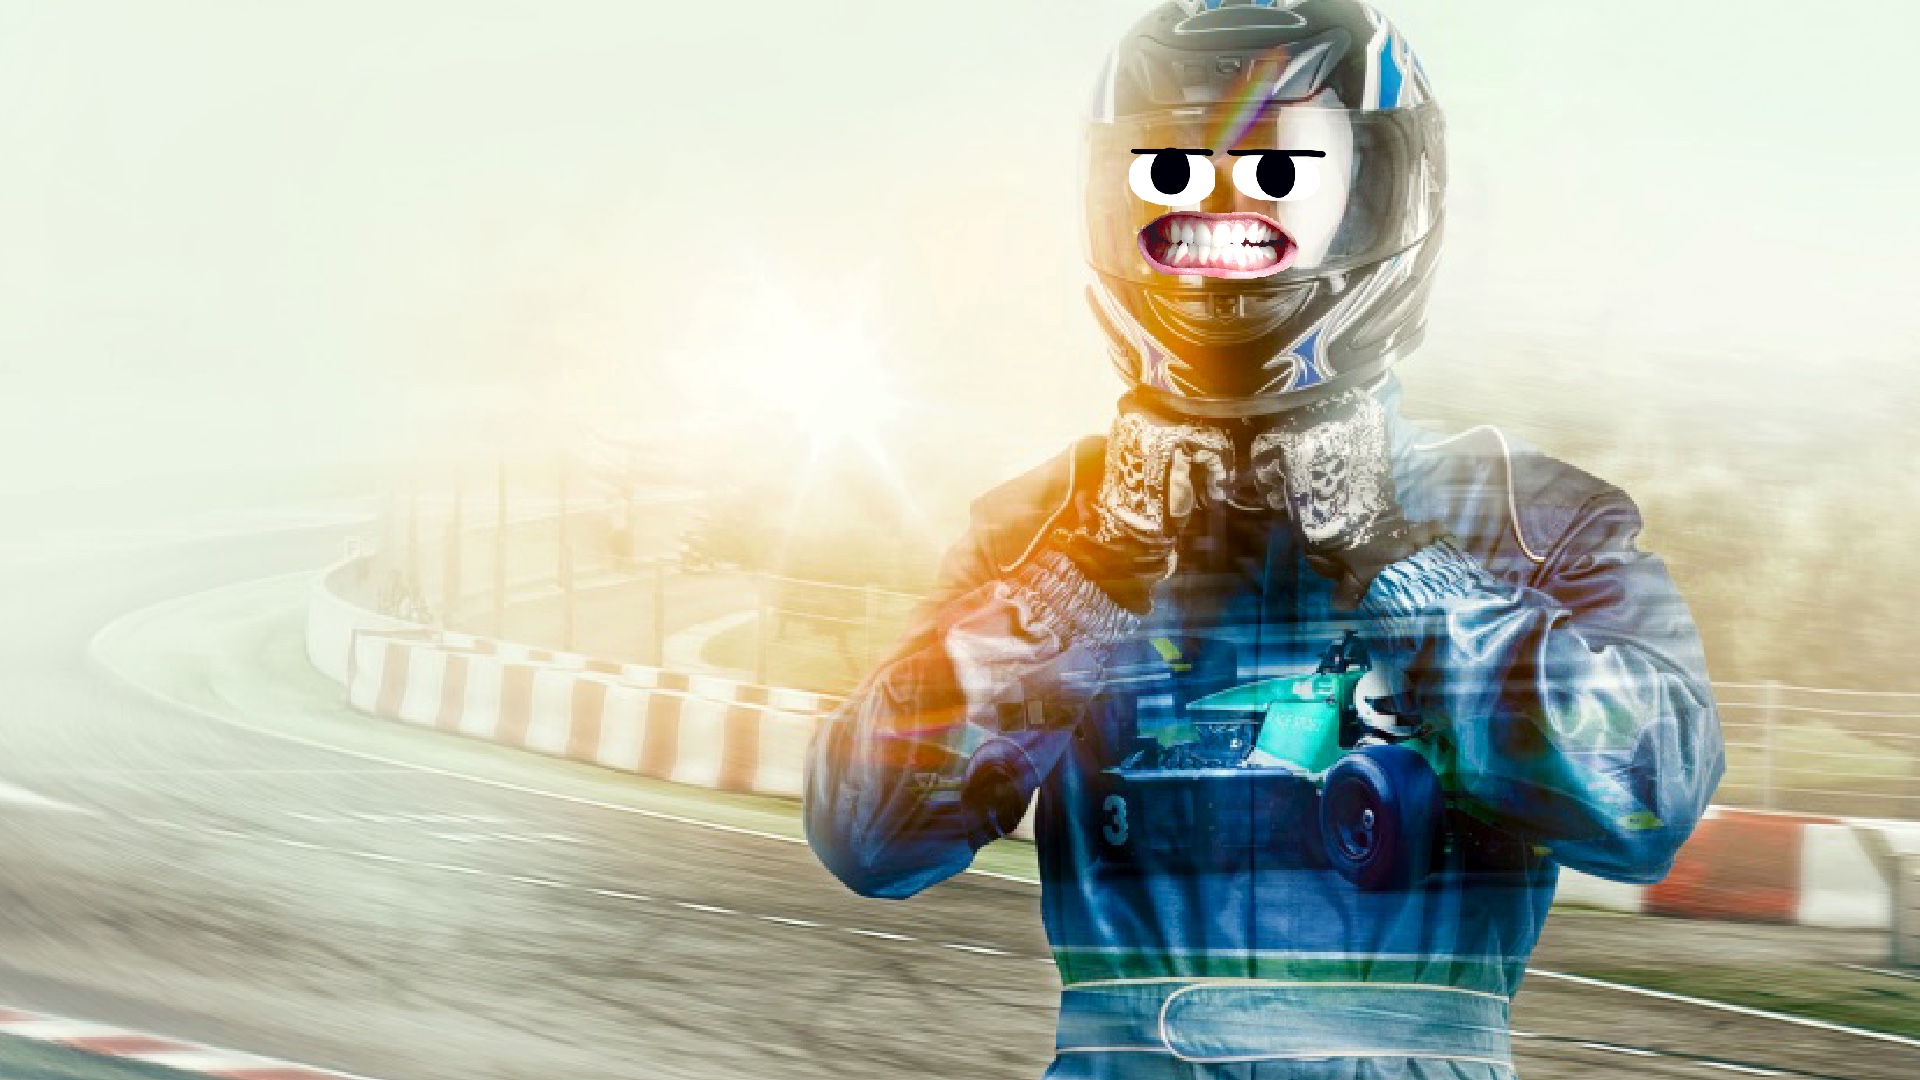 A picture of a race car driver in a blue boiler suit and helmet